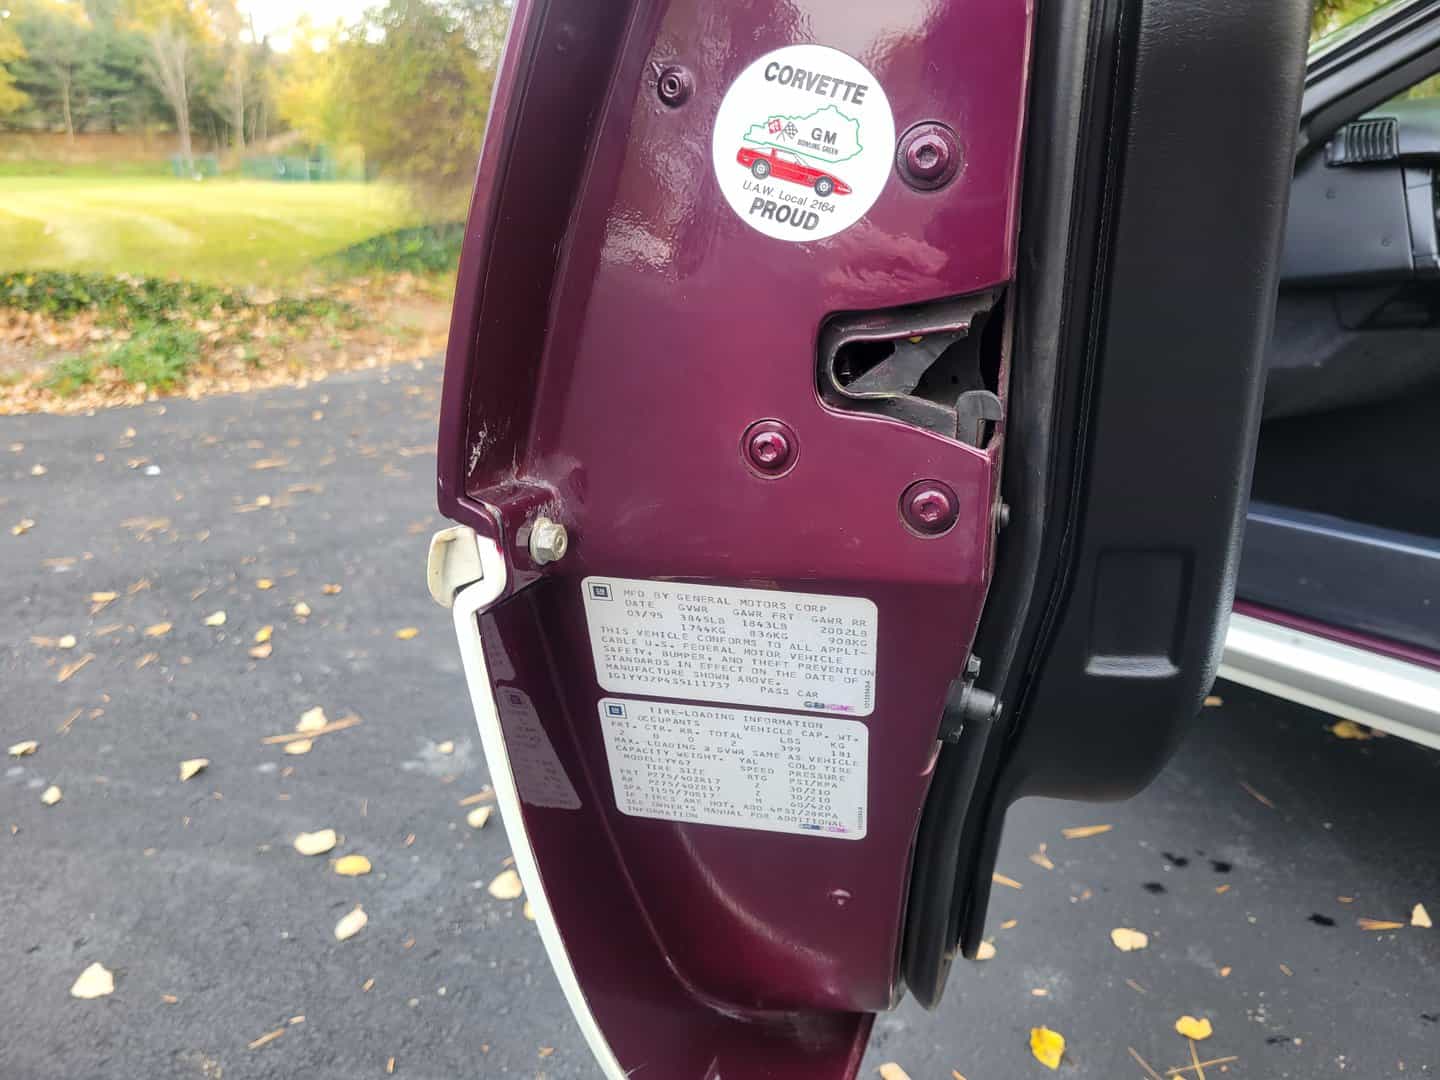 The door handle of a maroon 1995 Corvette Pace Car with a sticker on it.